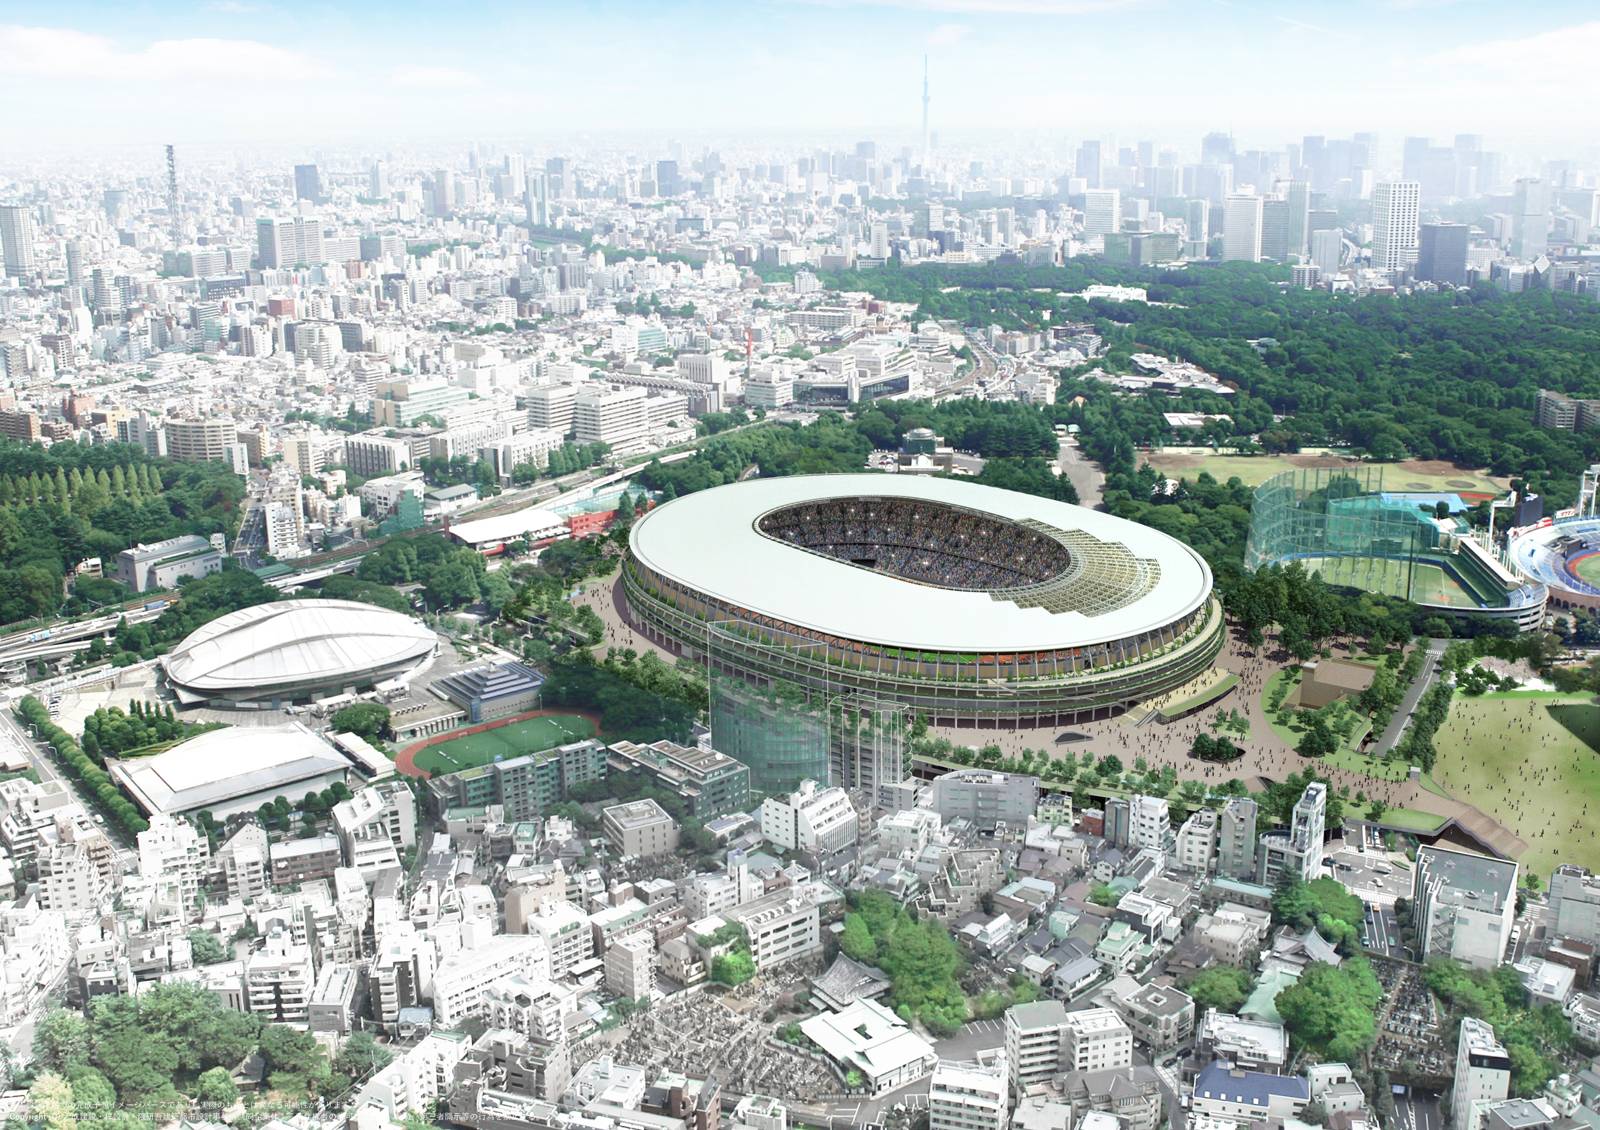 Aerial rendering of the National Stadium in Tokyo, surrounded by low-rise buildings